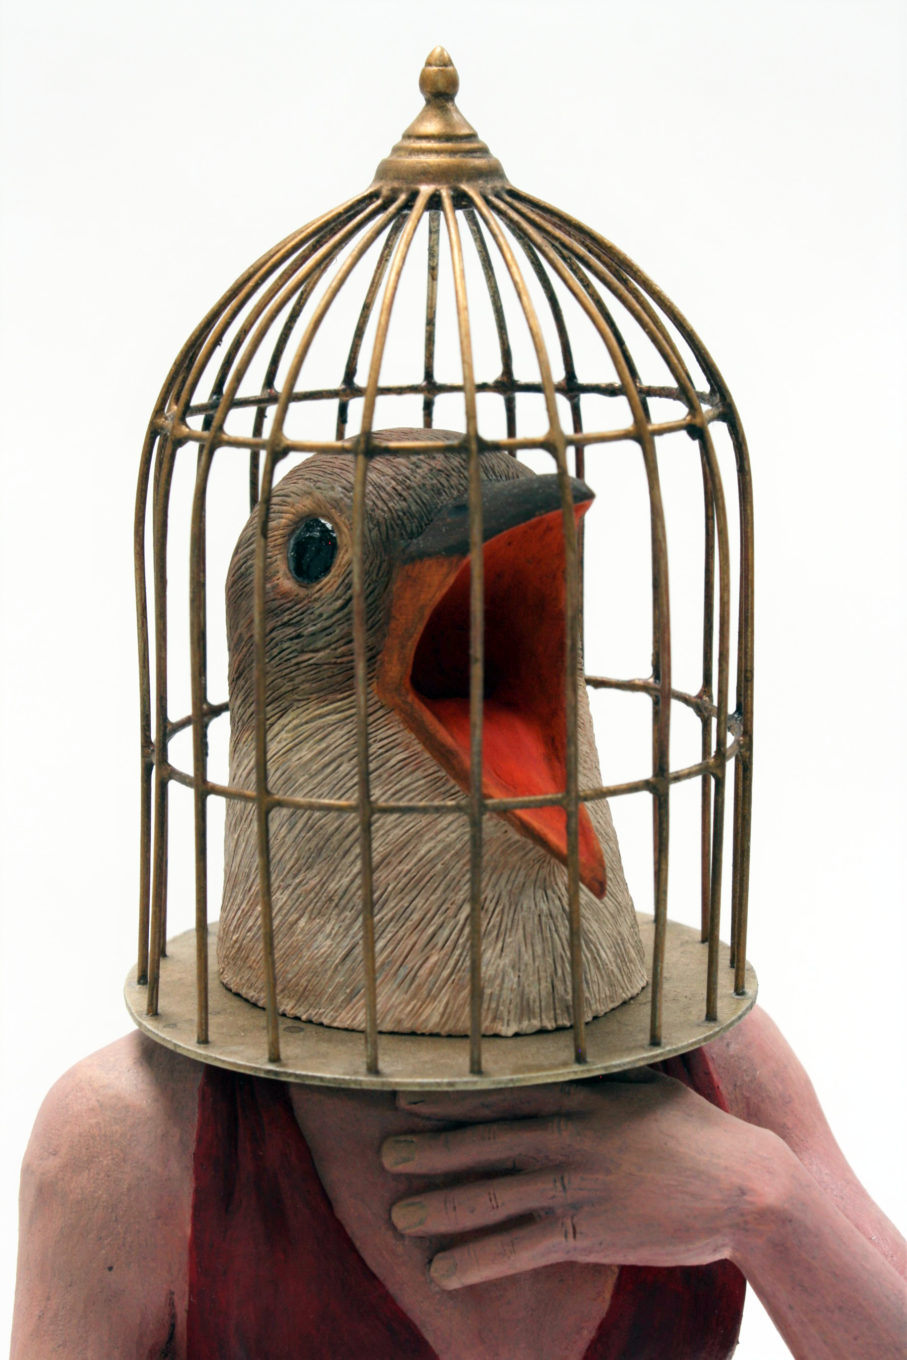 A person with a birds head trapped in a cage